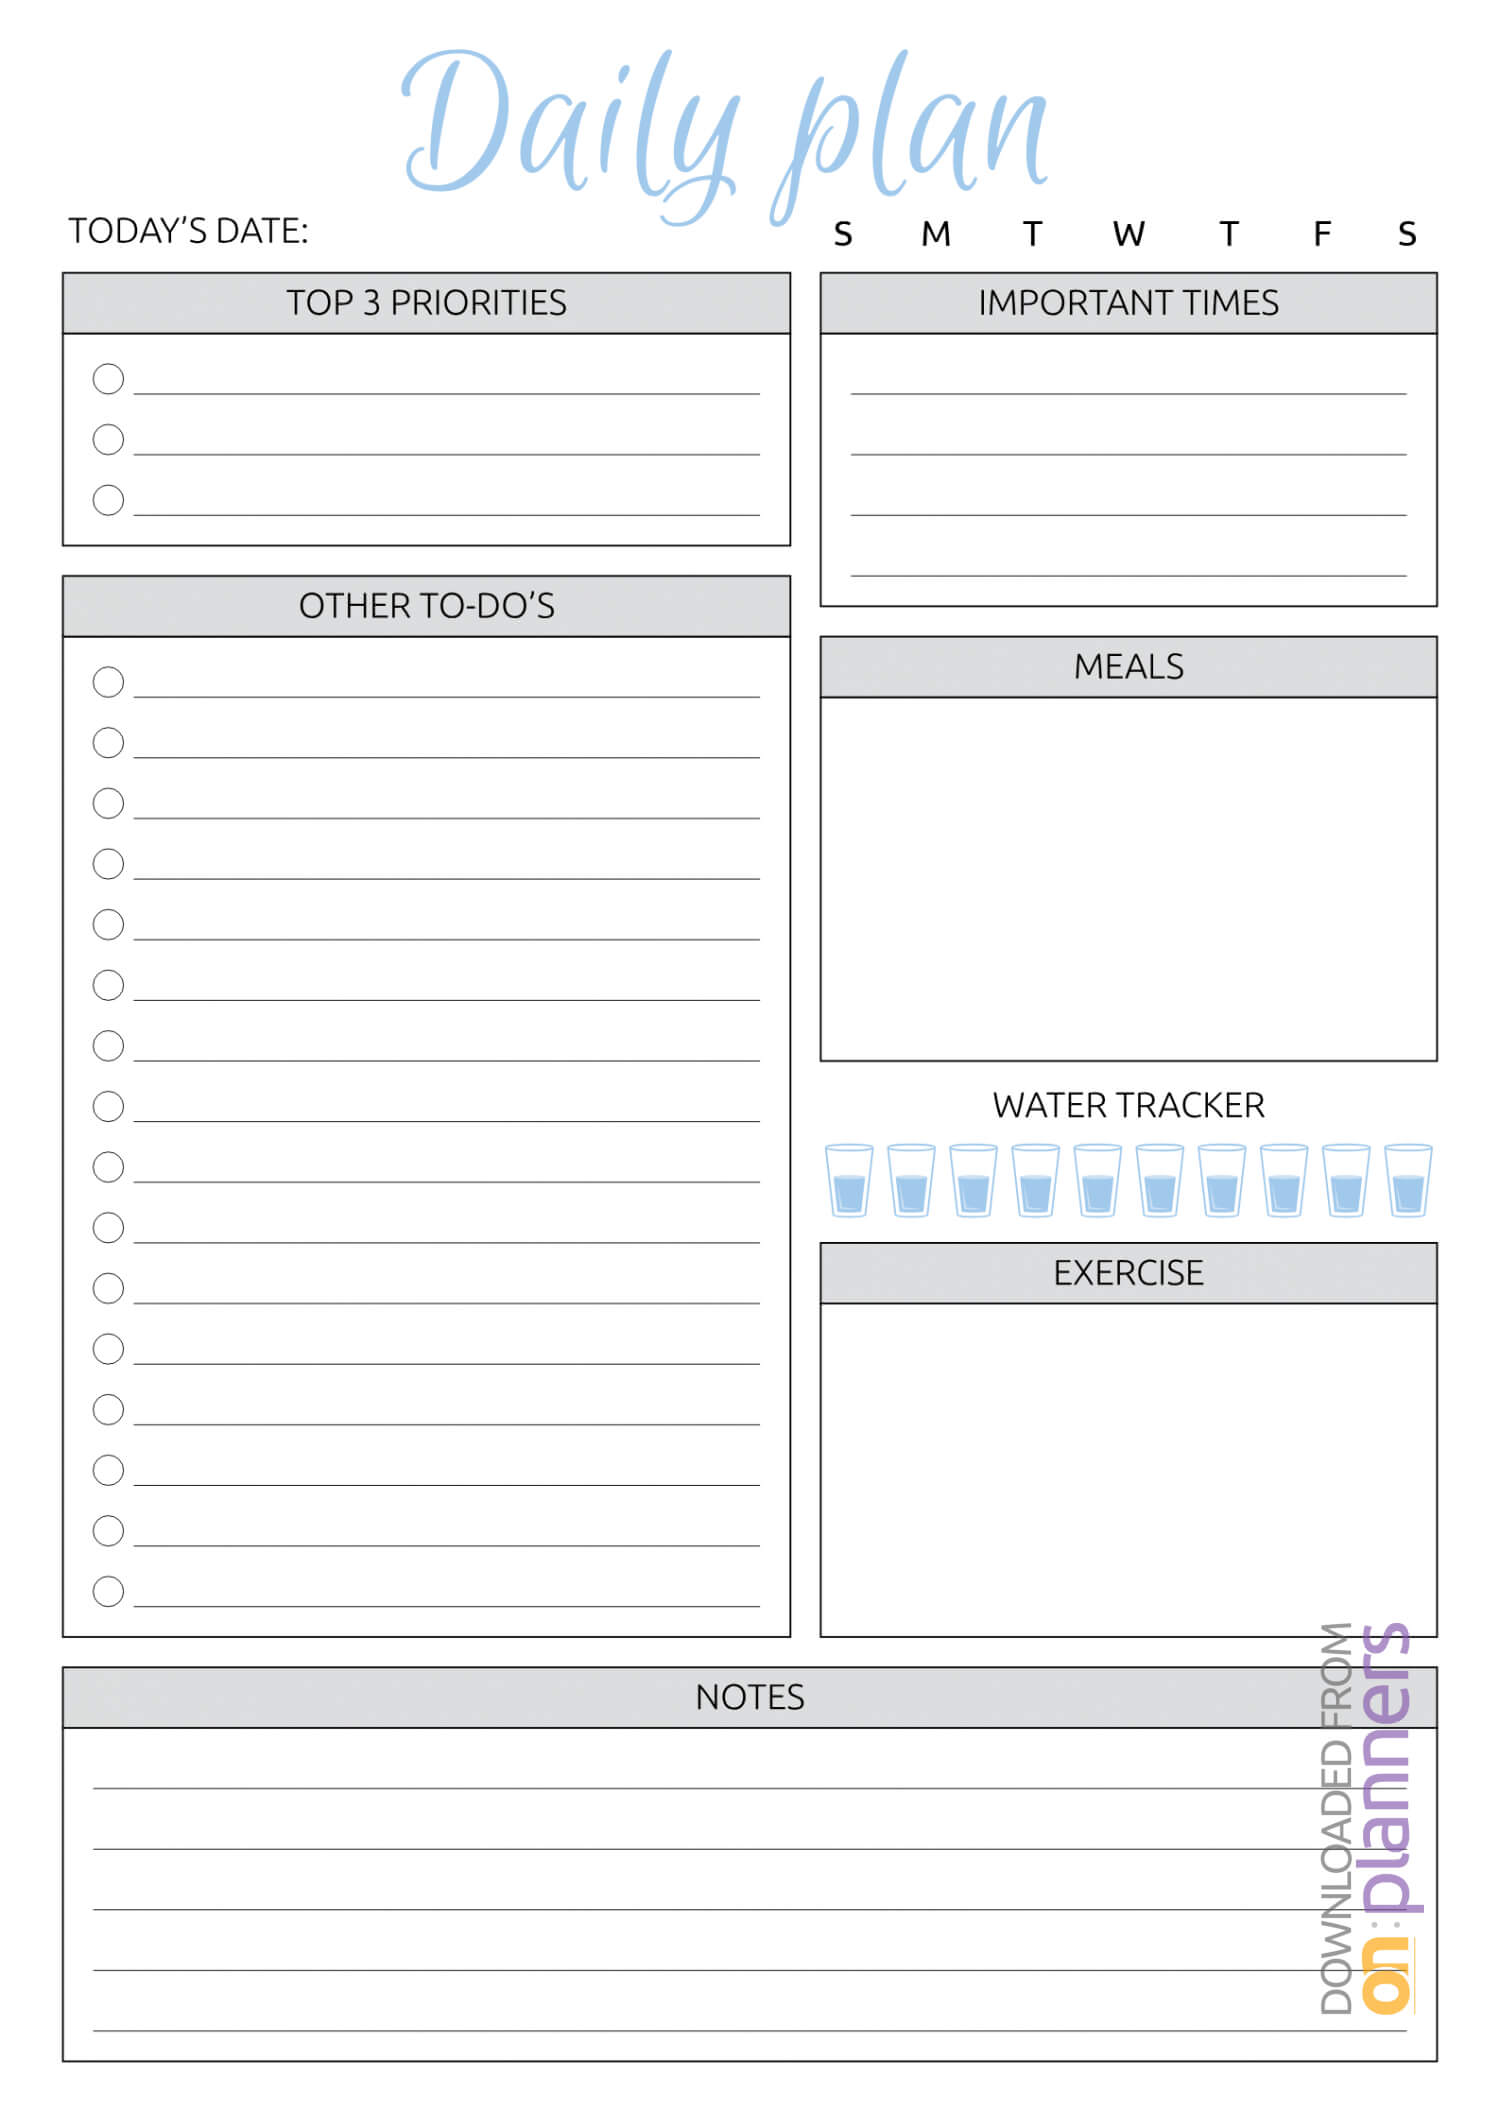 Download Printable Daily Plan With To Do List & Important Throughout Blank To Do List Template